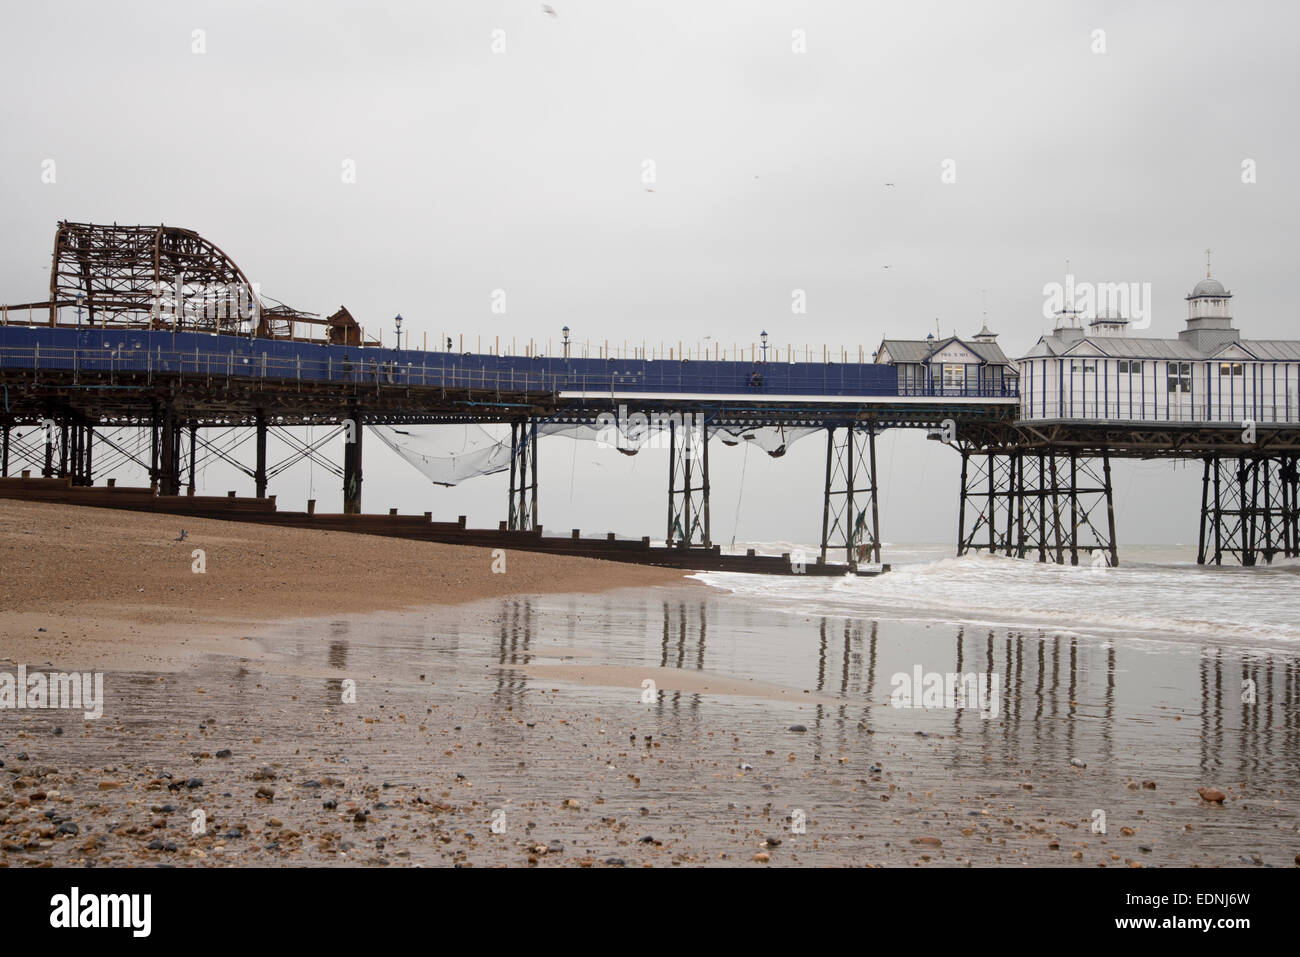 Eastbourne Pier, a grade II* listed building, showing the damaged portion and the netting added after the fire in Sept 2014 Stock Photo